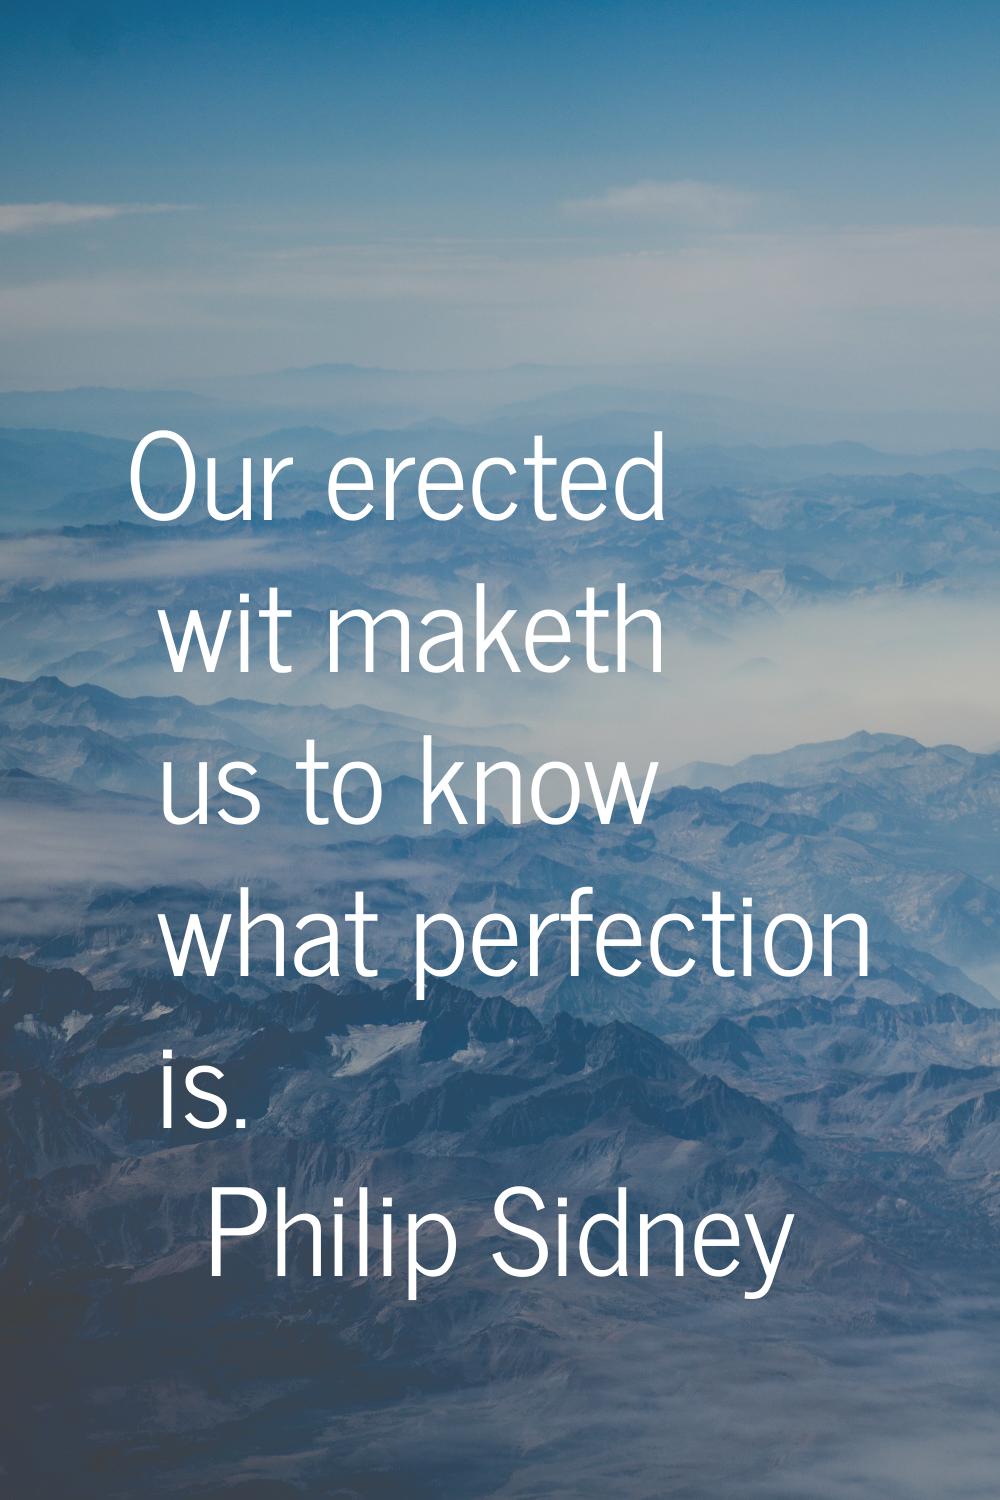 Our erected wit maketh us to know what perfection is.